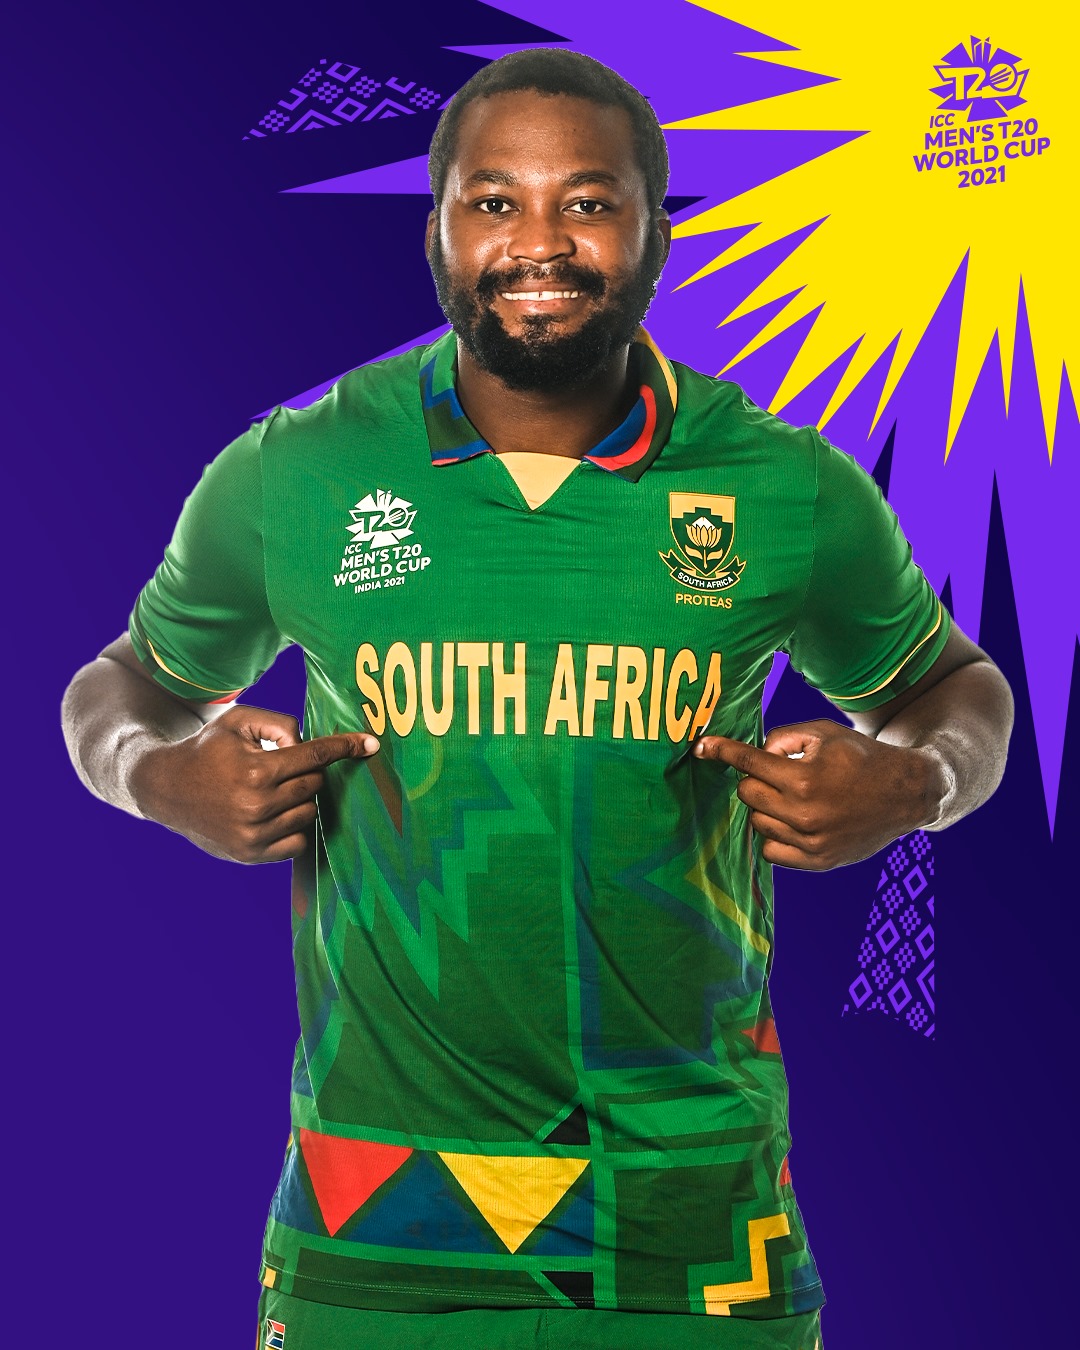 South African Team Jersey for T20 World Cup 2021